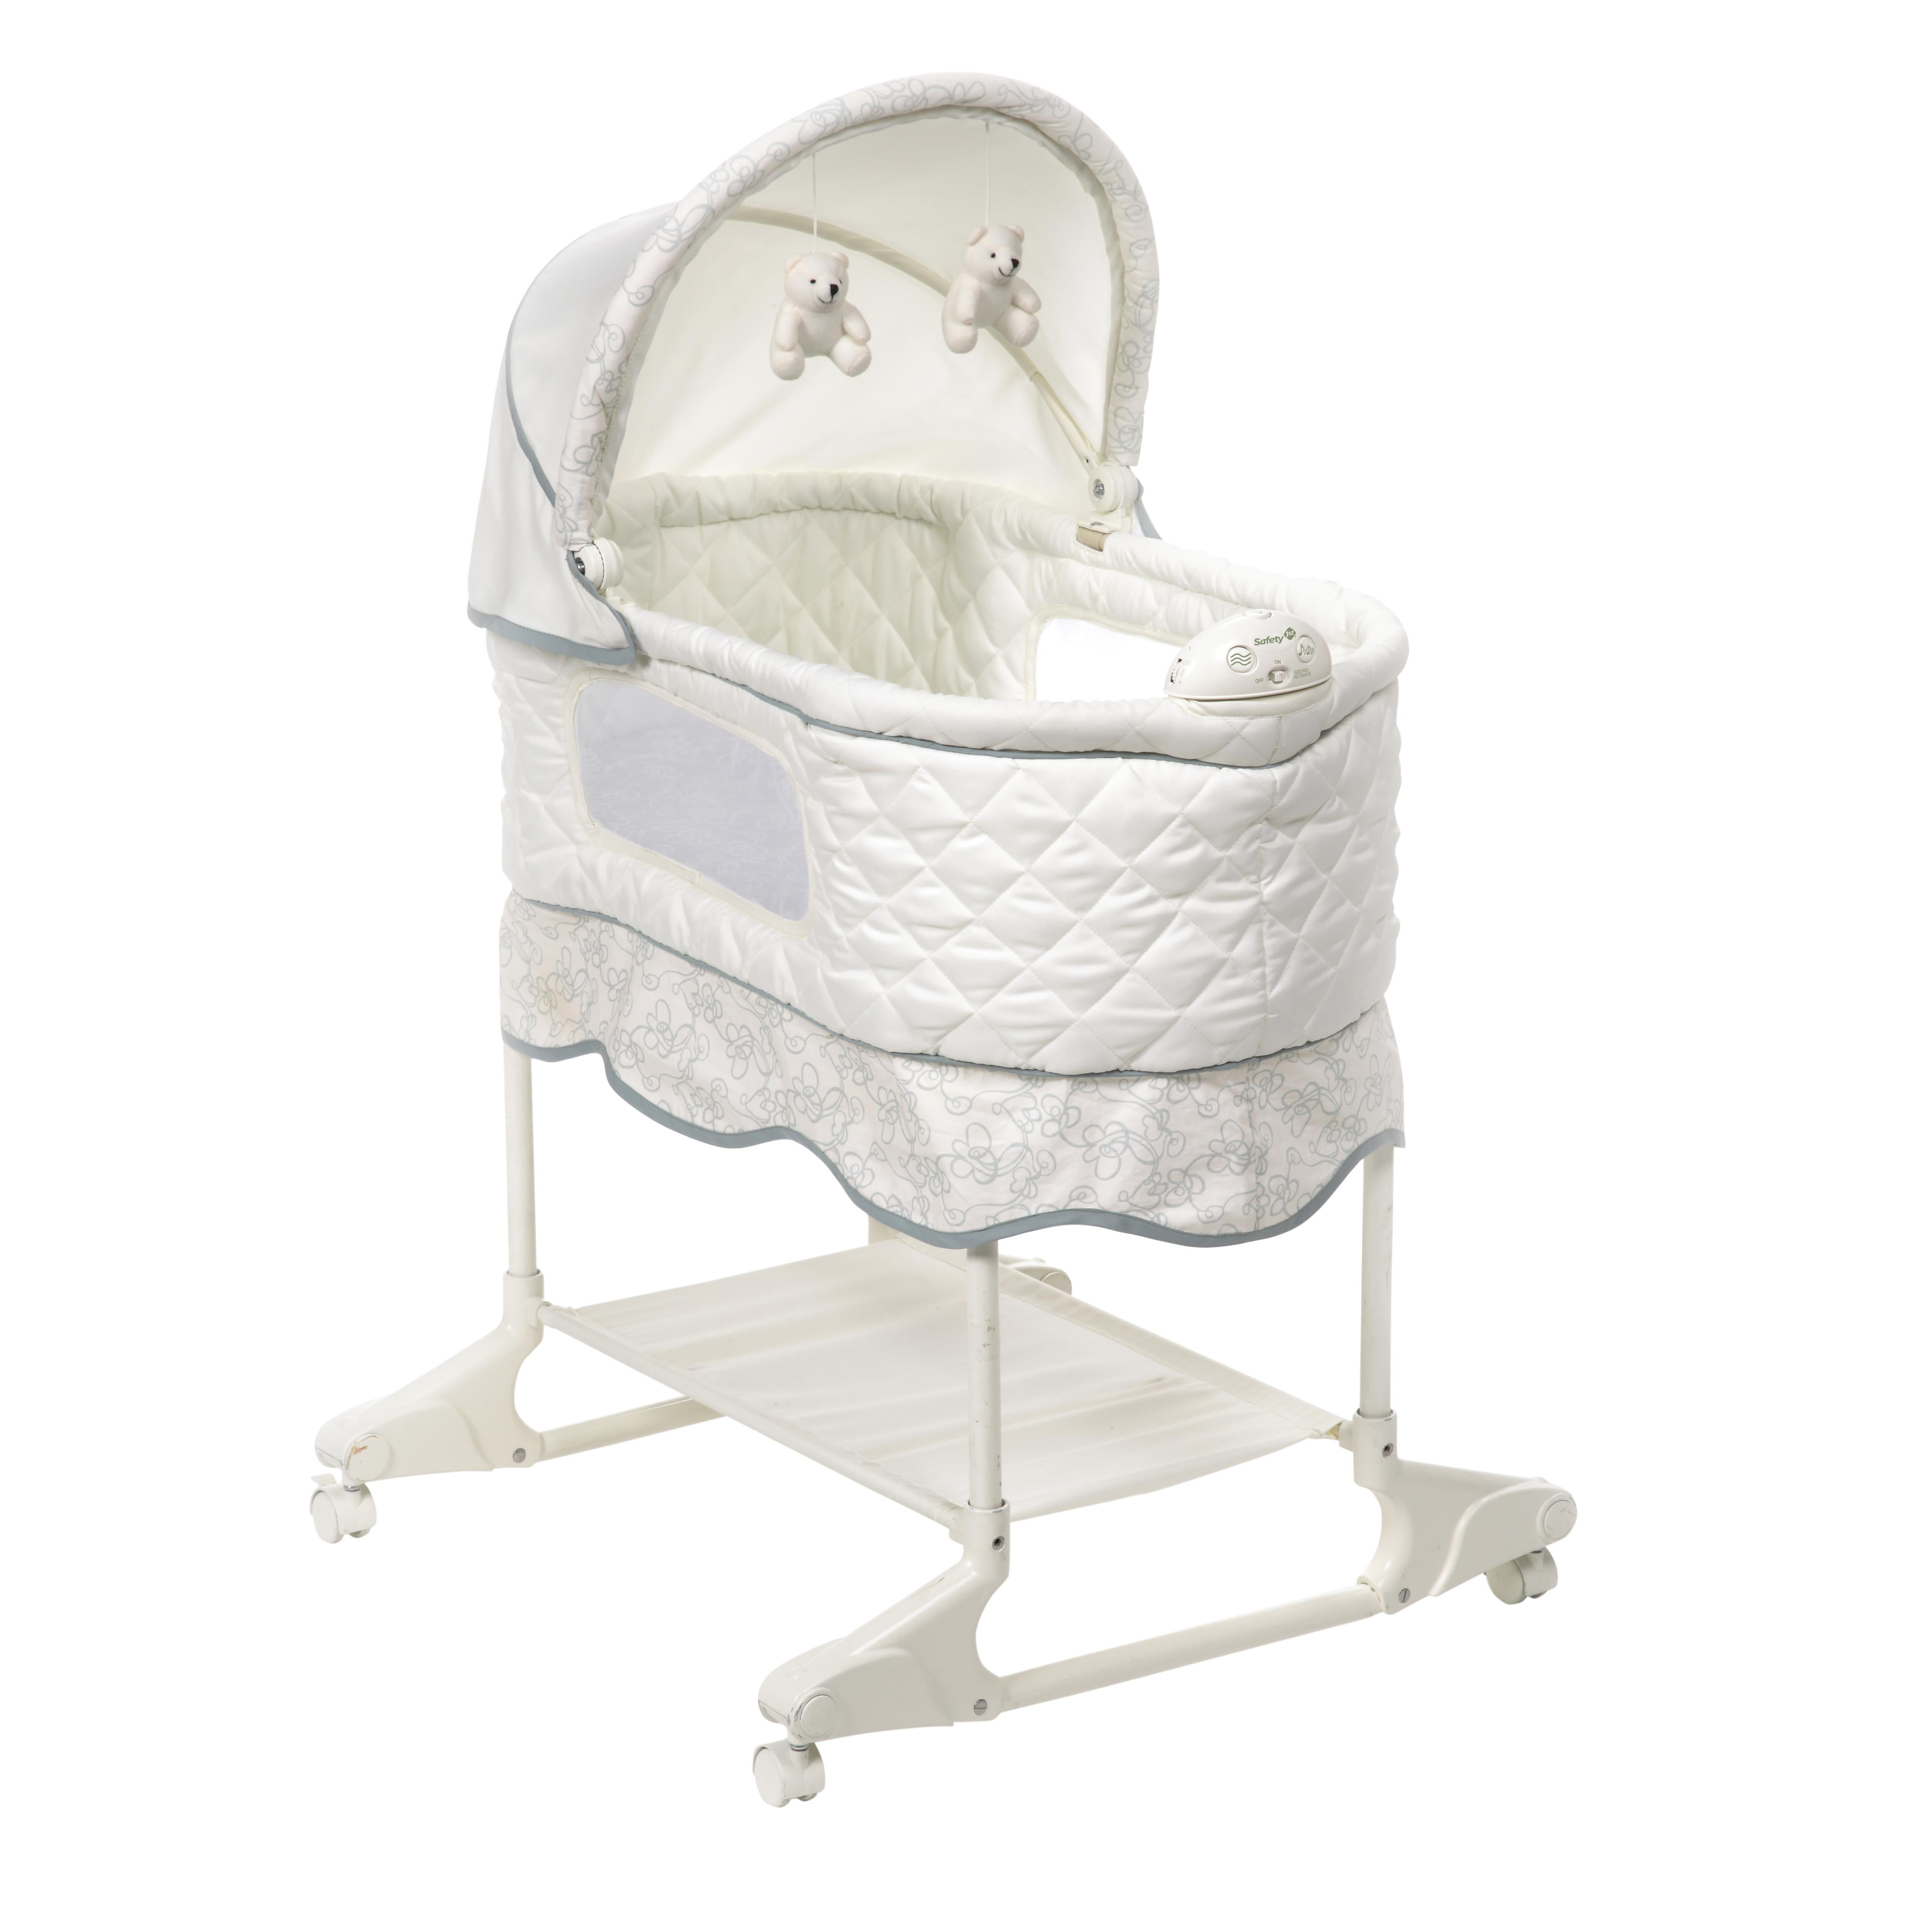 safety first bassinet